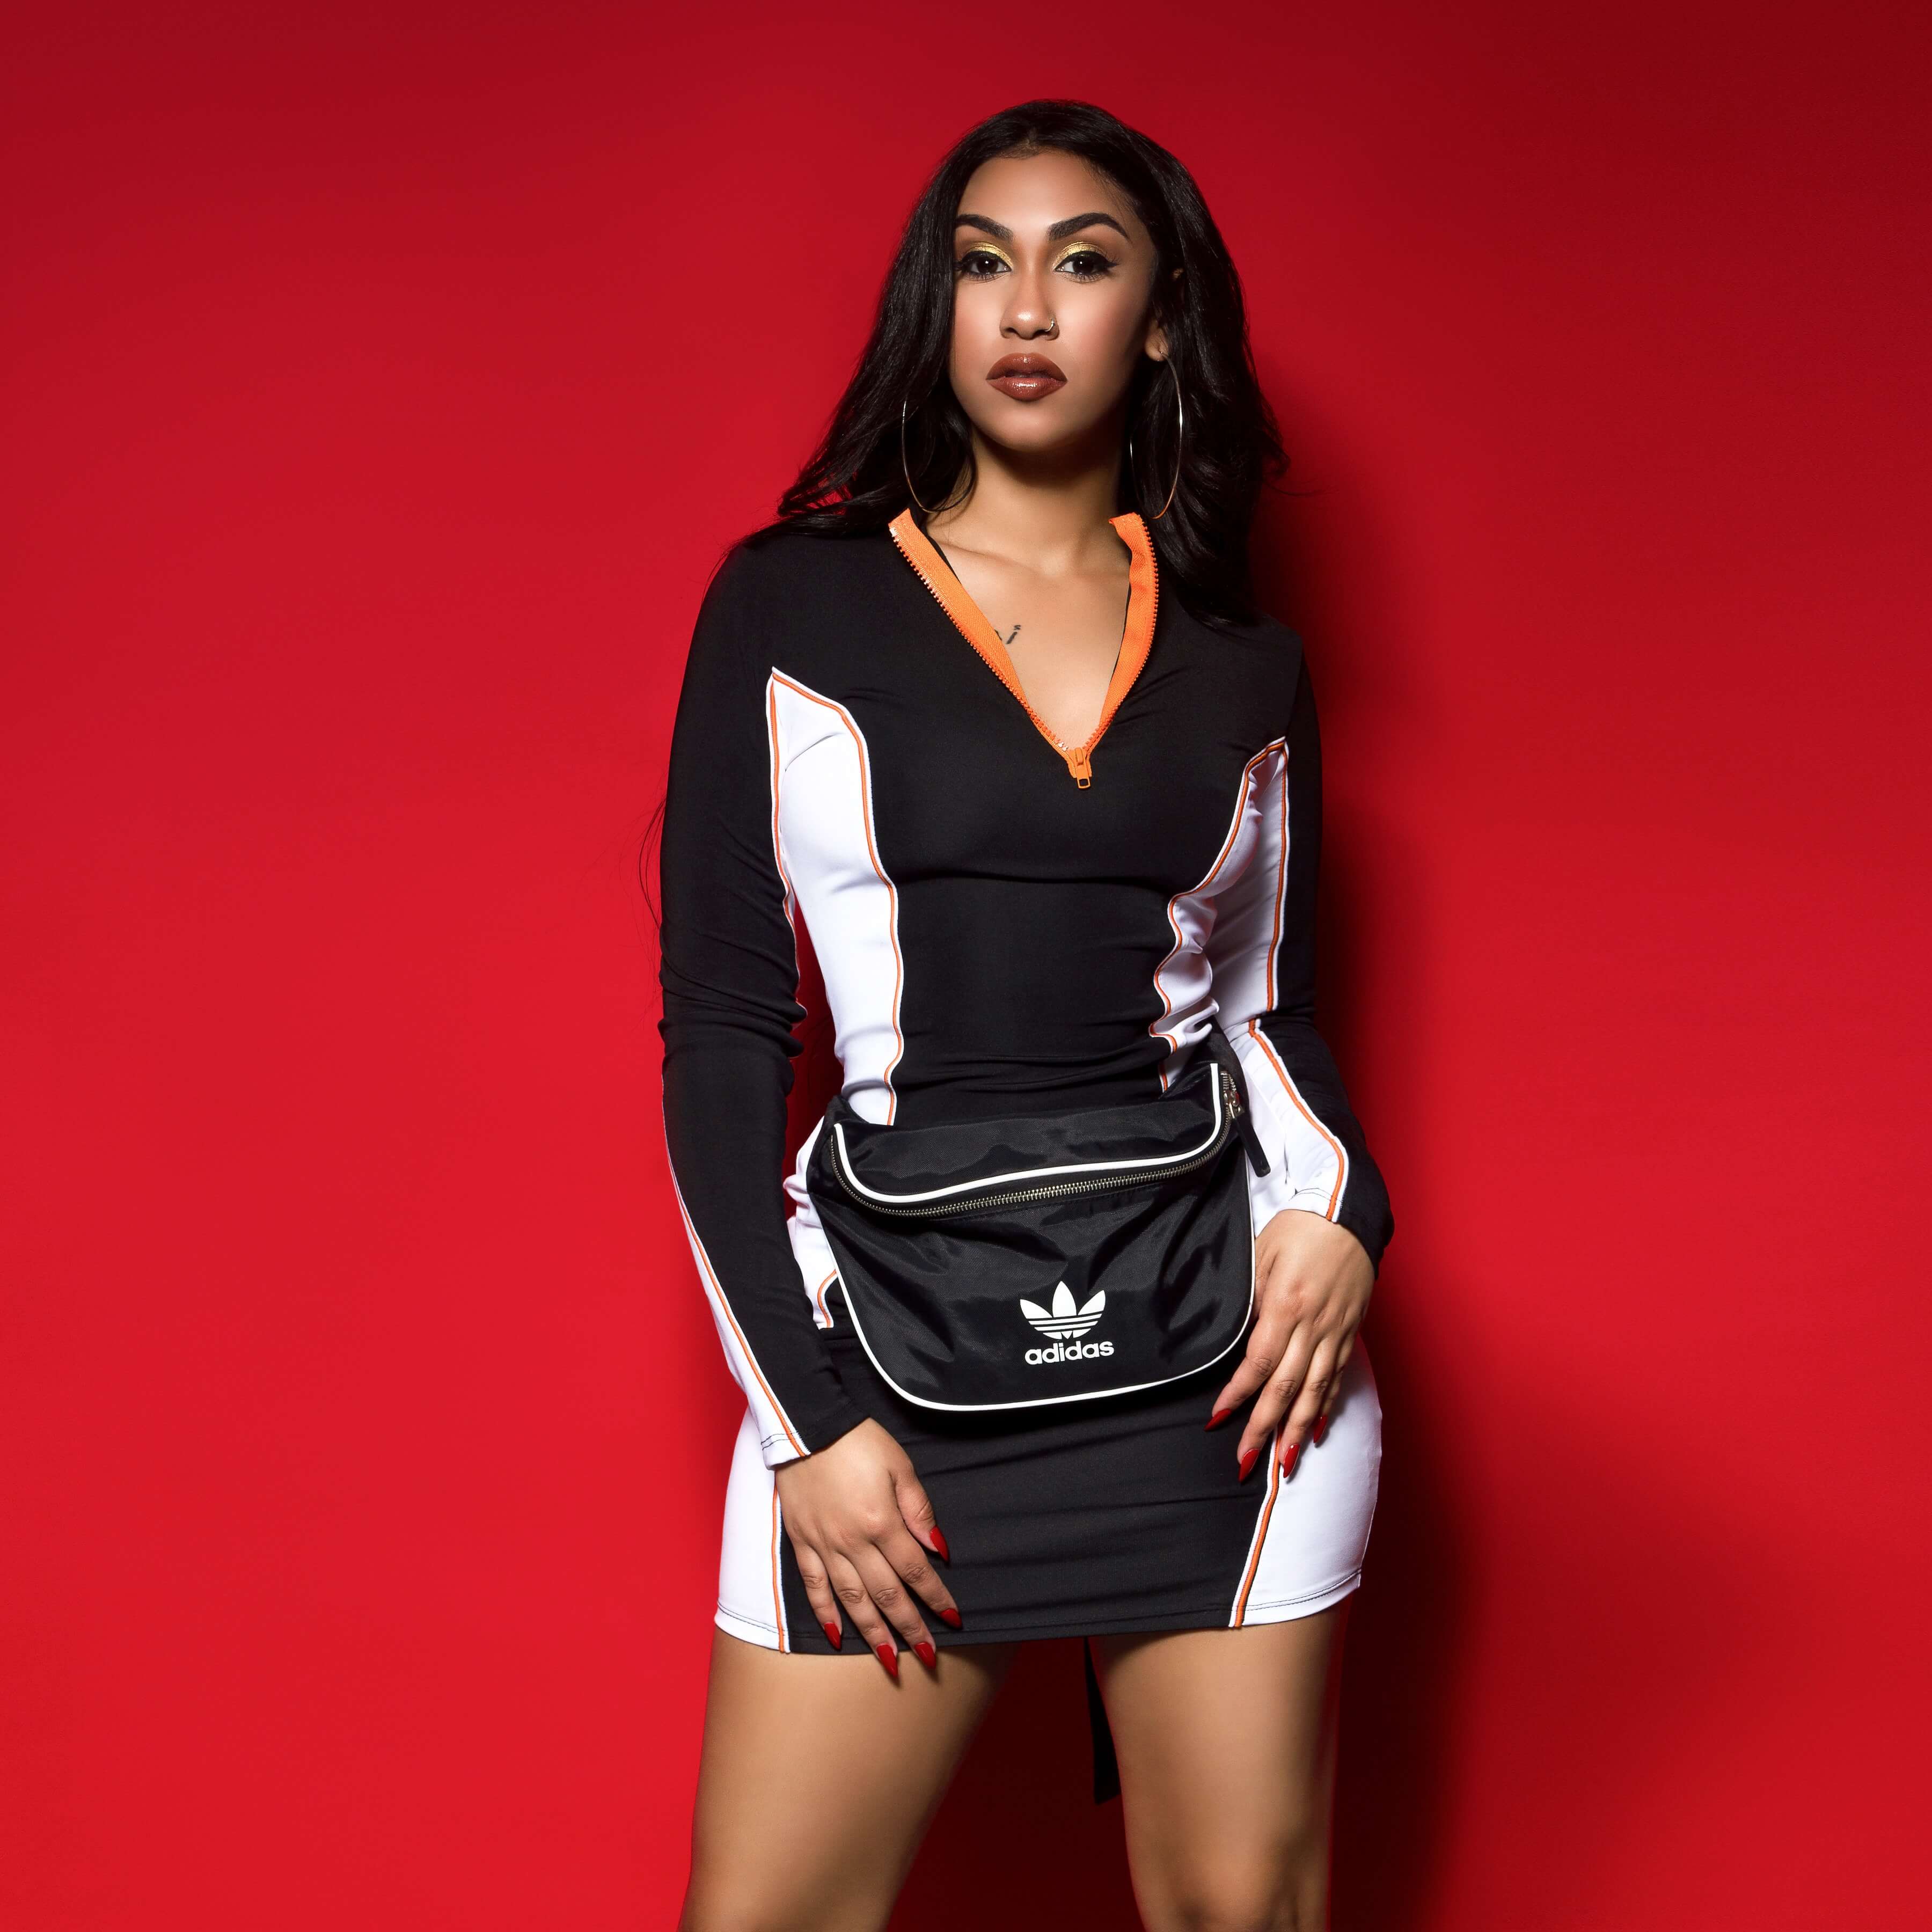 49 Hot Pictures Of Queen Naija Which Are Going To Make You Want Her Badly | Best Of Comic Books